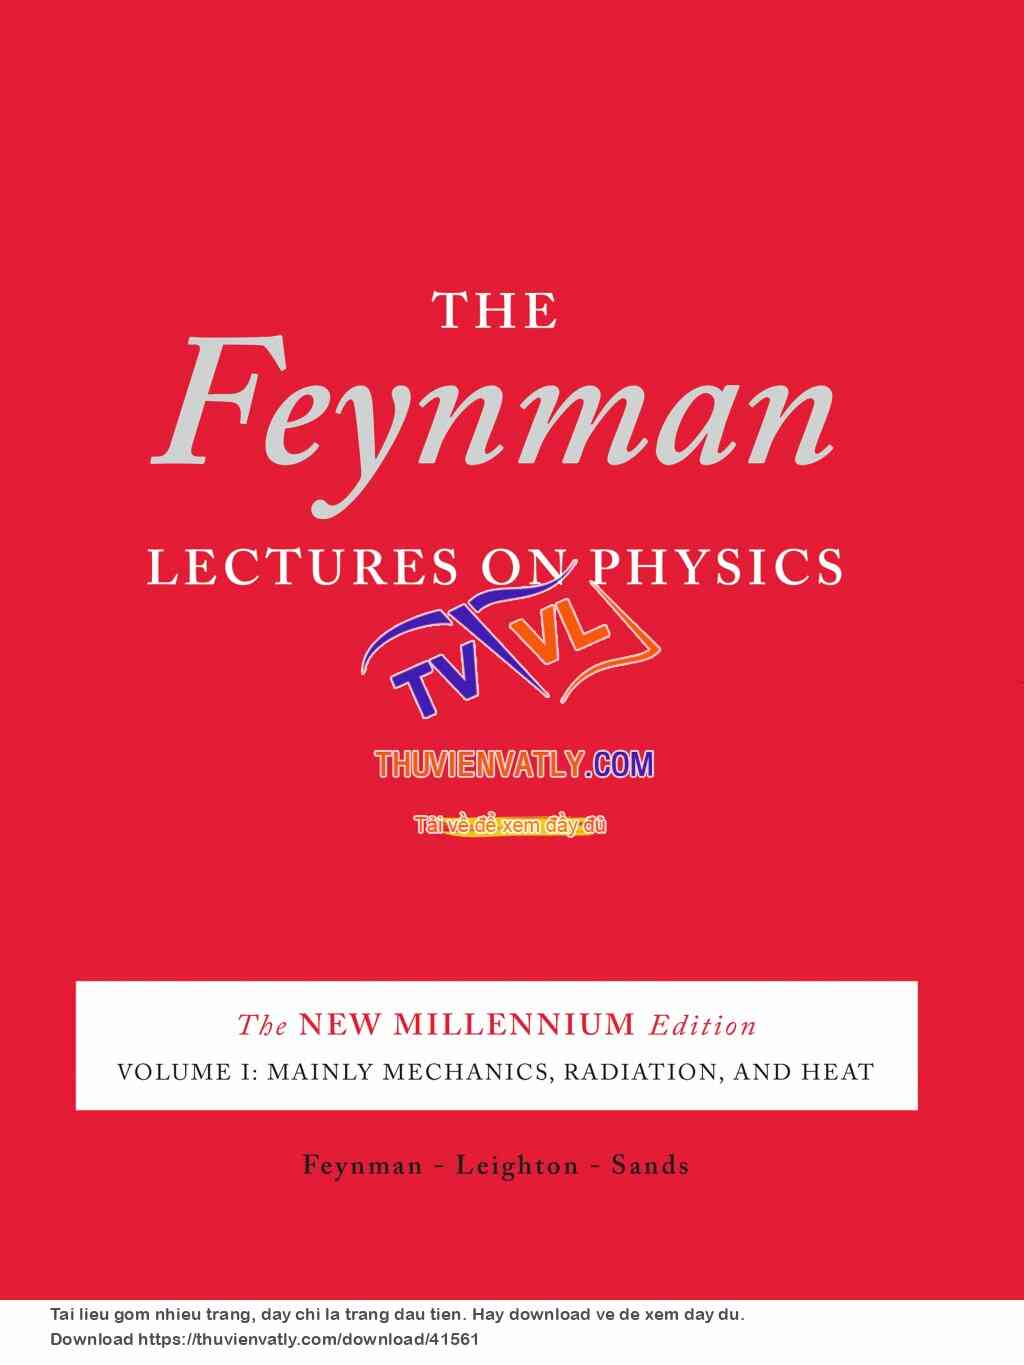 The Feynman Lectures on Physics - The New Millennium Edition